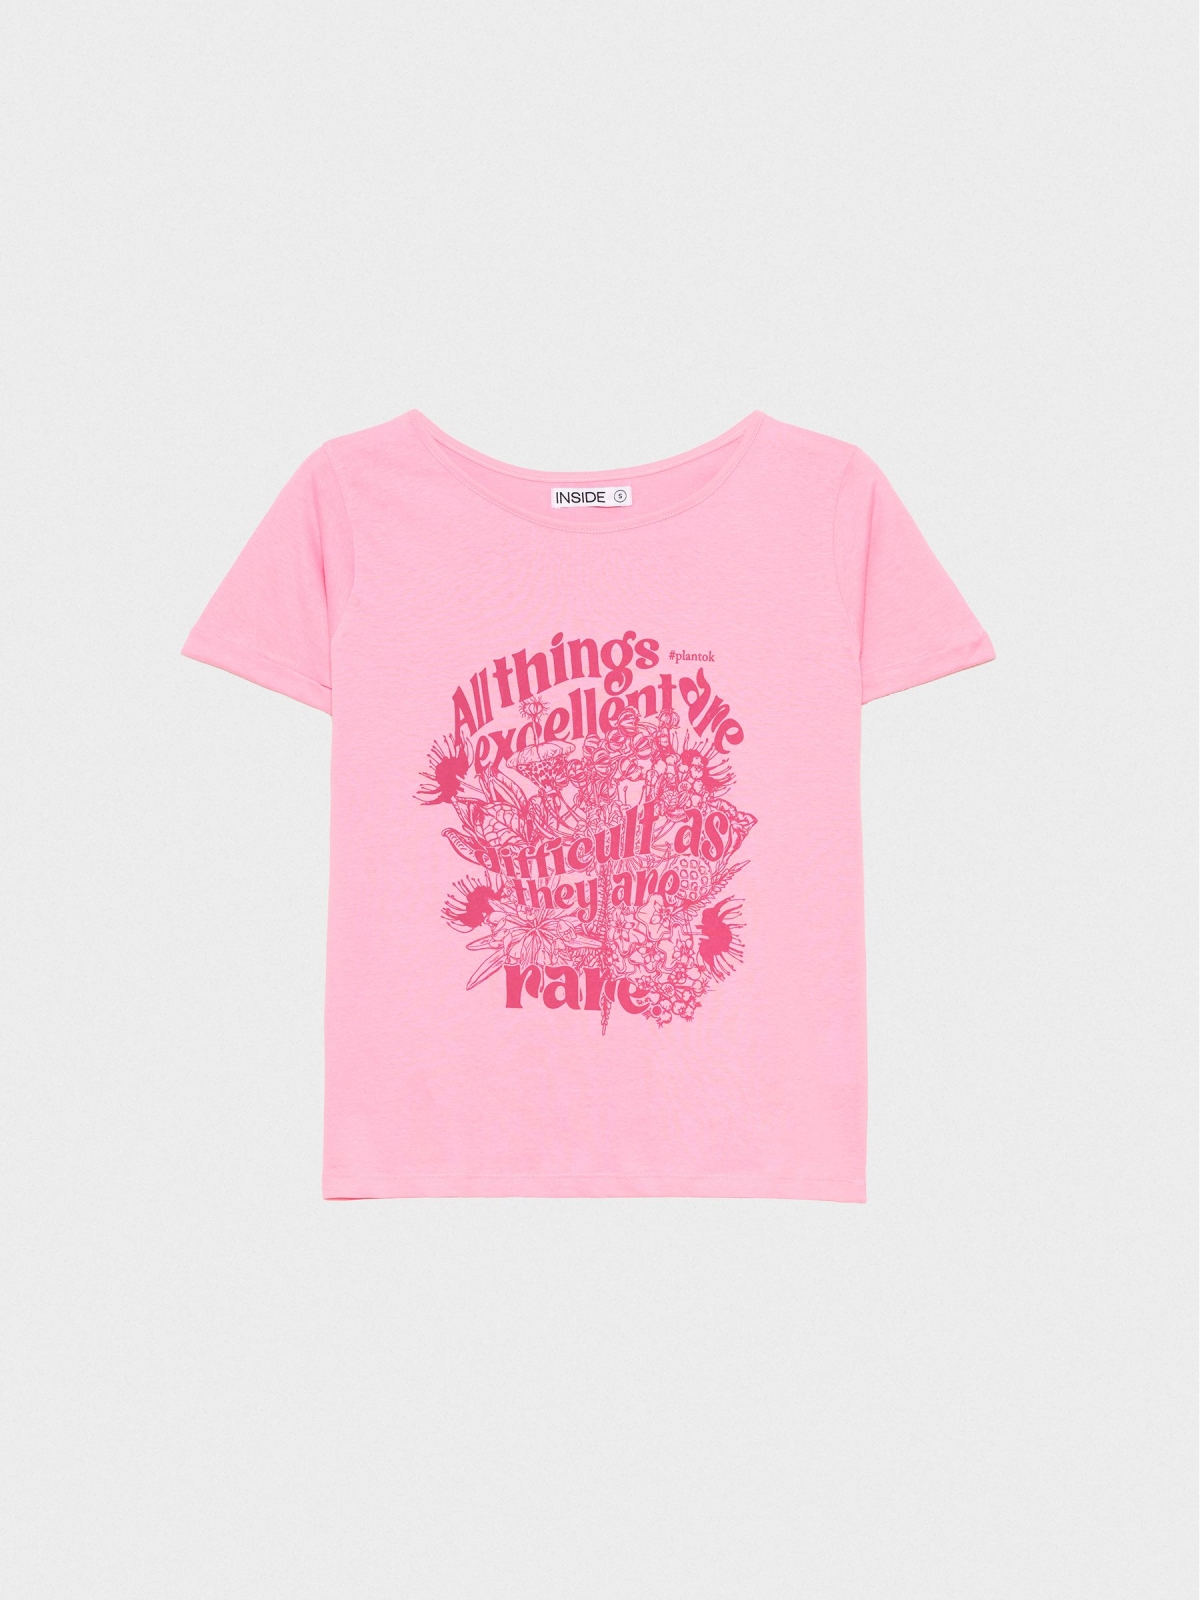  All Things Excellent T-shirt pink